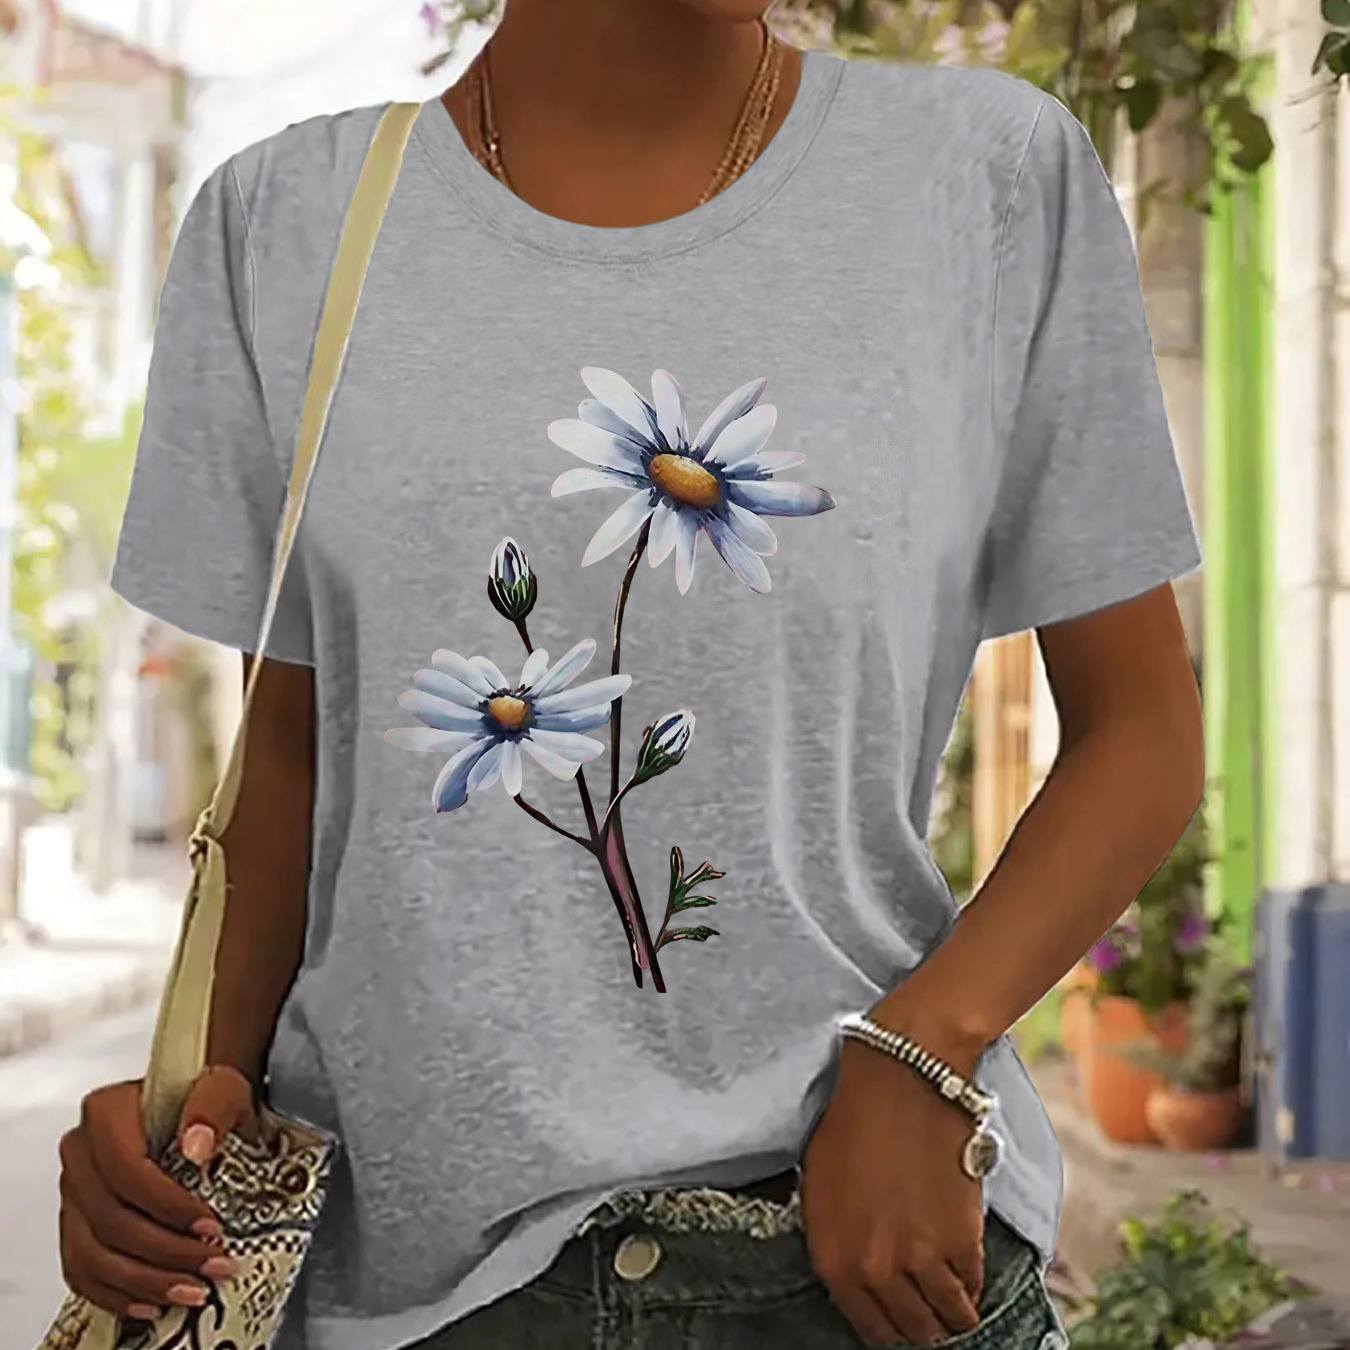 

Floral Print T-shirt, Short Sleeve Crew Neck Casual Top For Summer & Spring, Women's Clothing